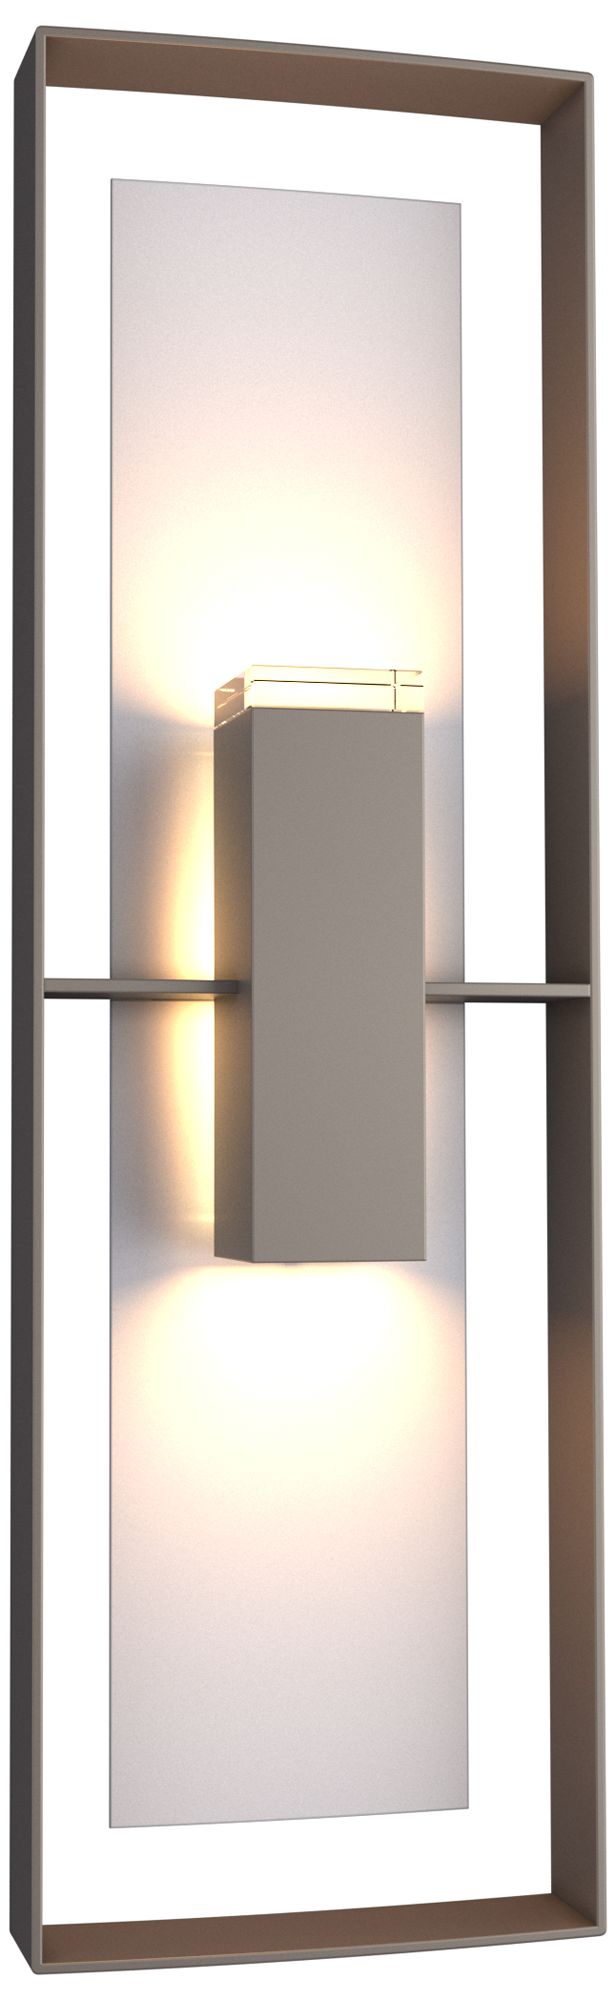 Shadow Box Tall Outdoor Sconce - Smoke Finish - Steel Accents - Clear Glass